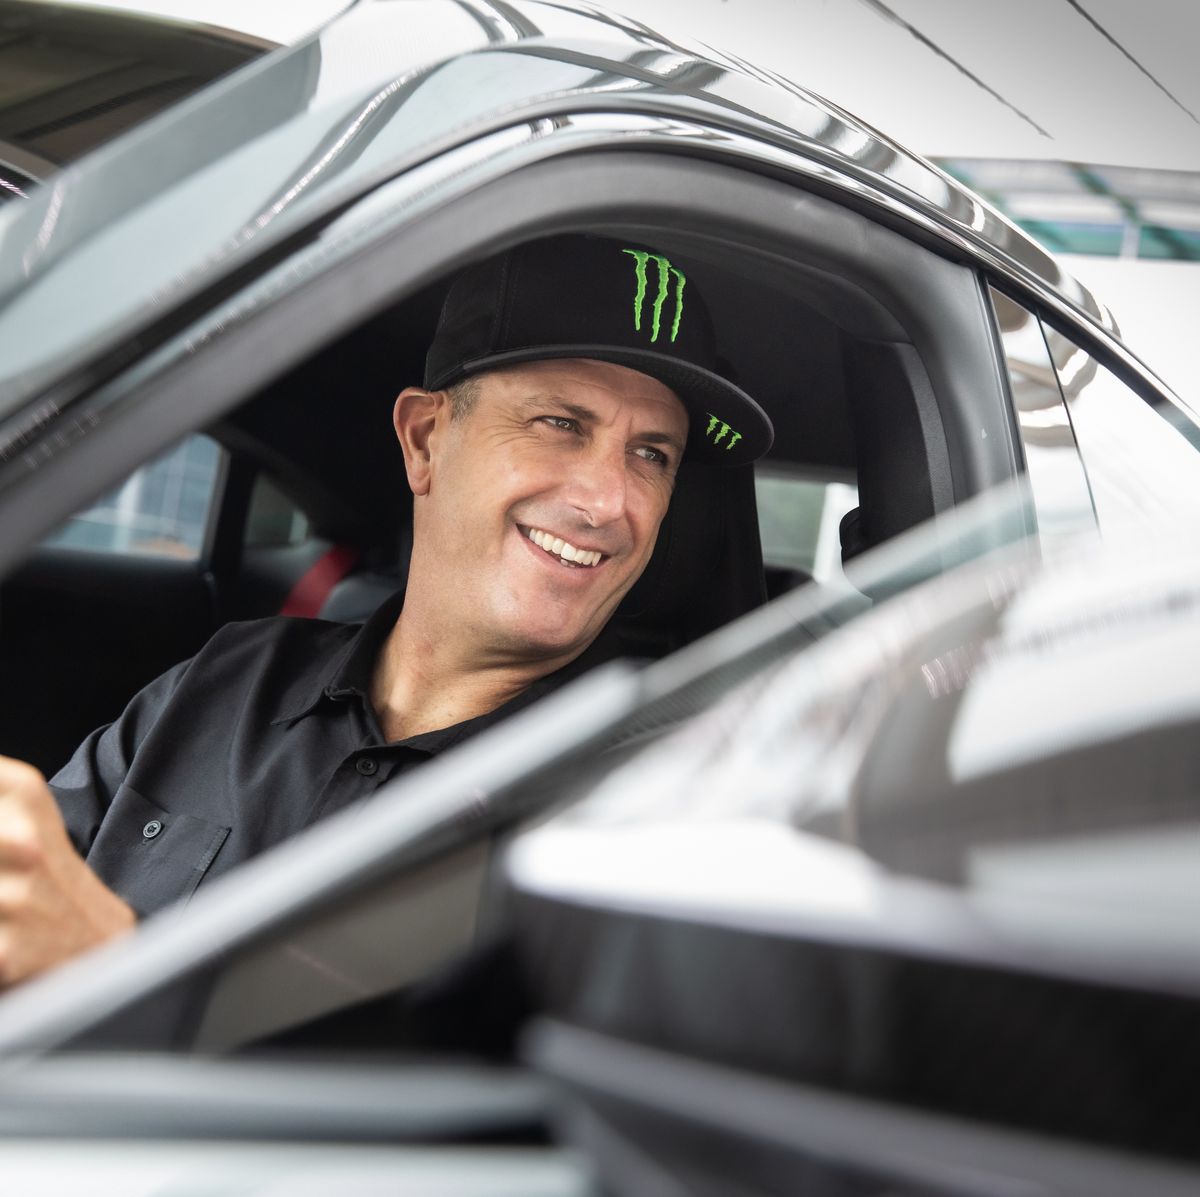 Ken Block, Car Culture Luminary, Honored by Enthusiast World